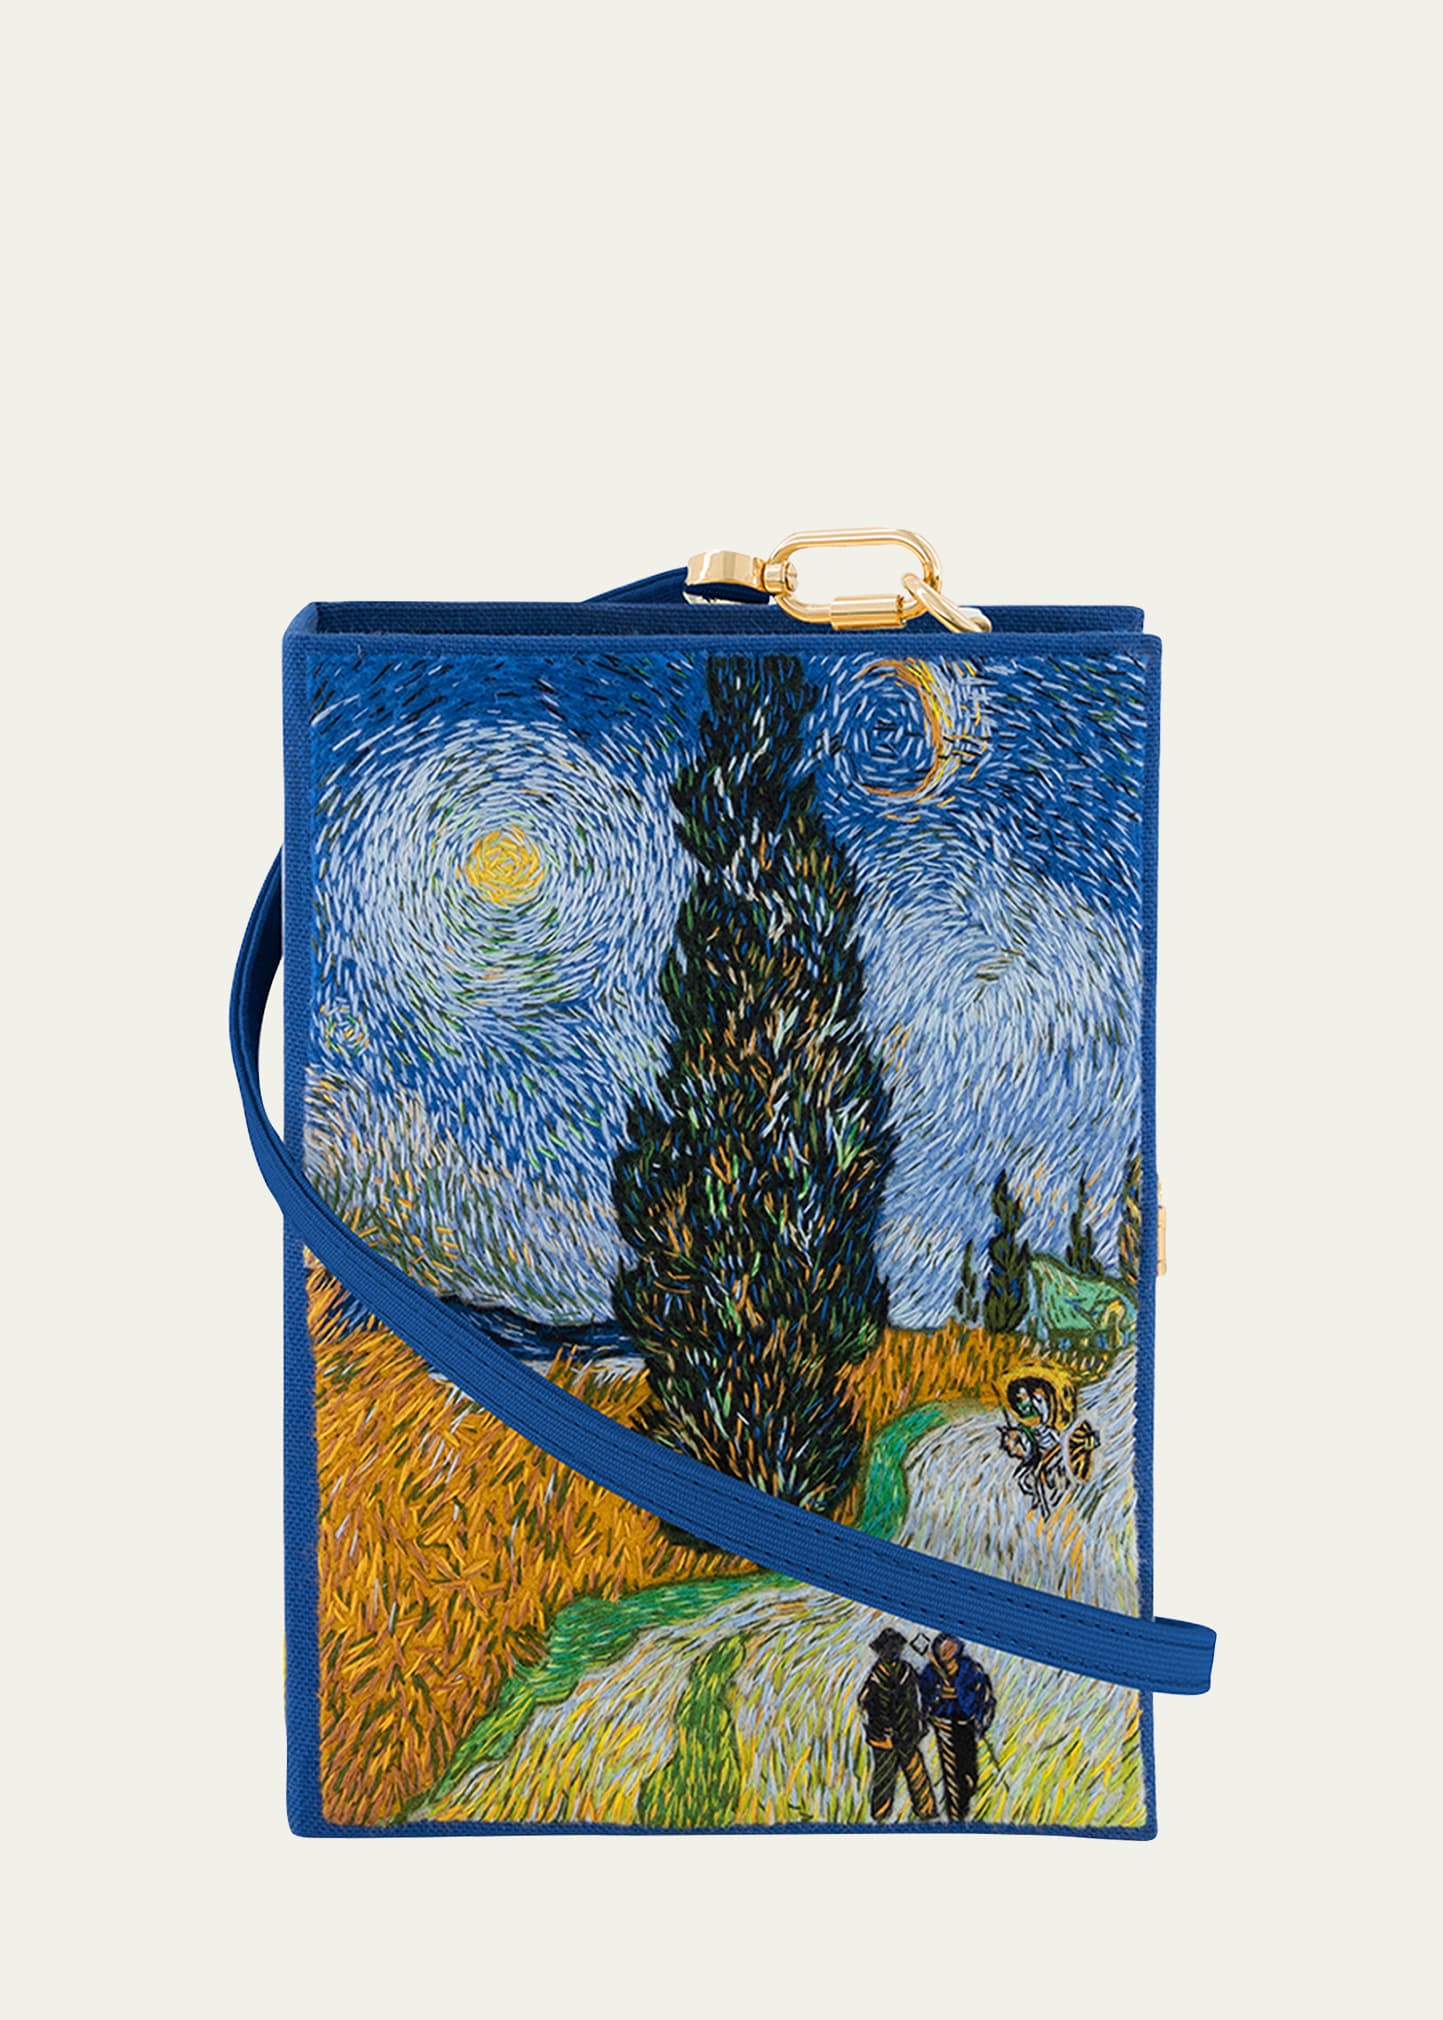 OLYMPIA LE-TAN ROAD WITH CYPRESS AND STAR BY VICENT VAN GOUGH BOOK CLUTCH BAG